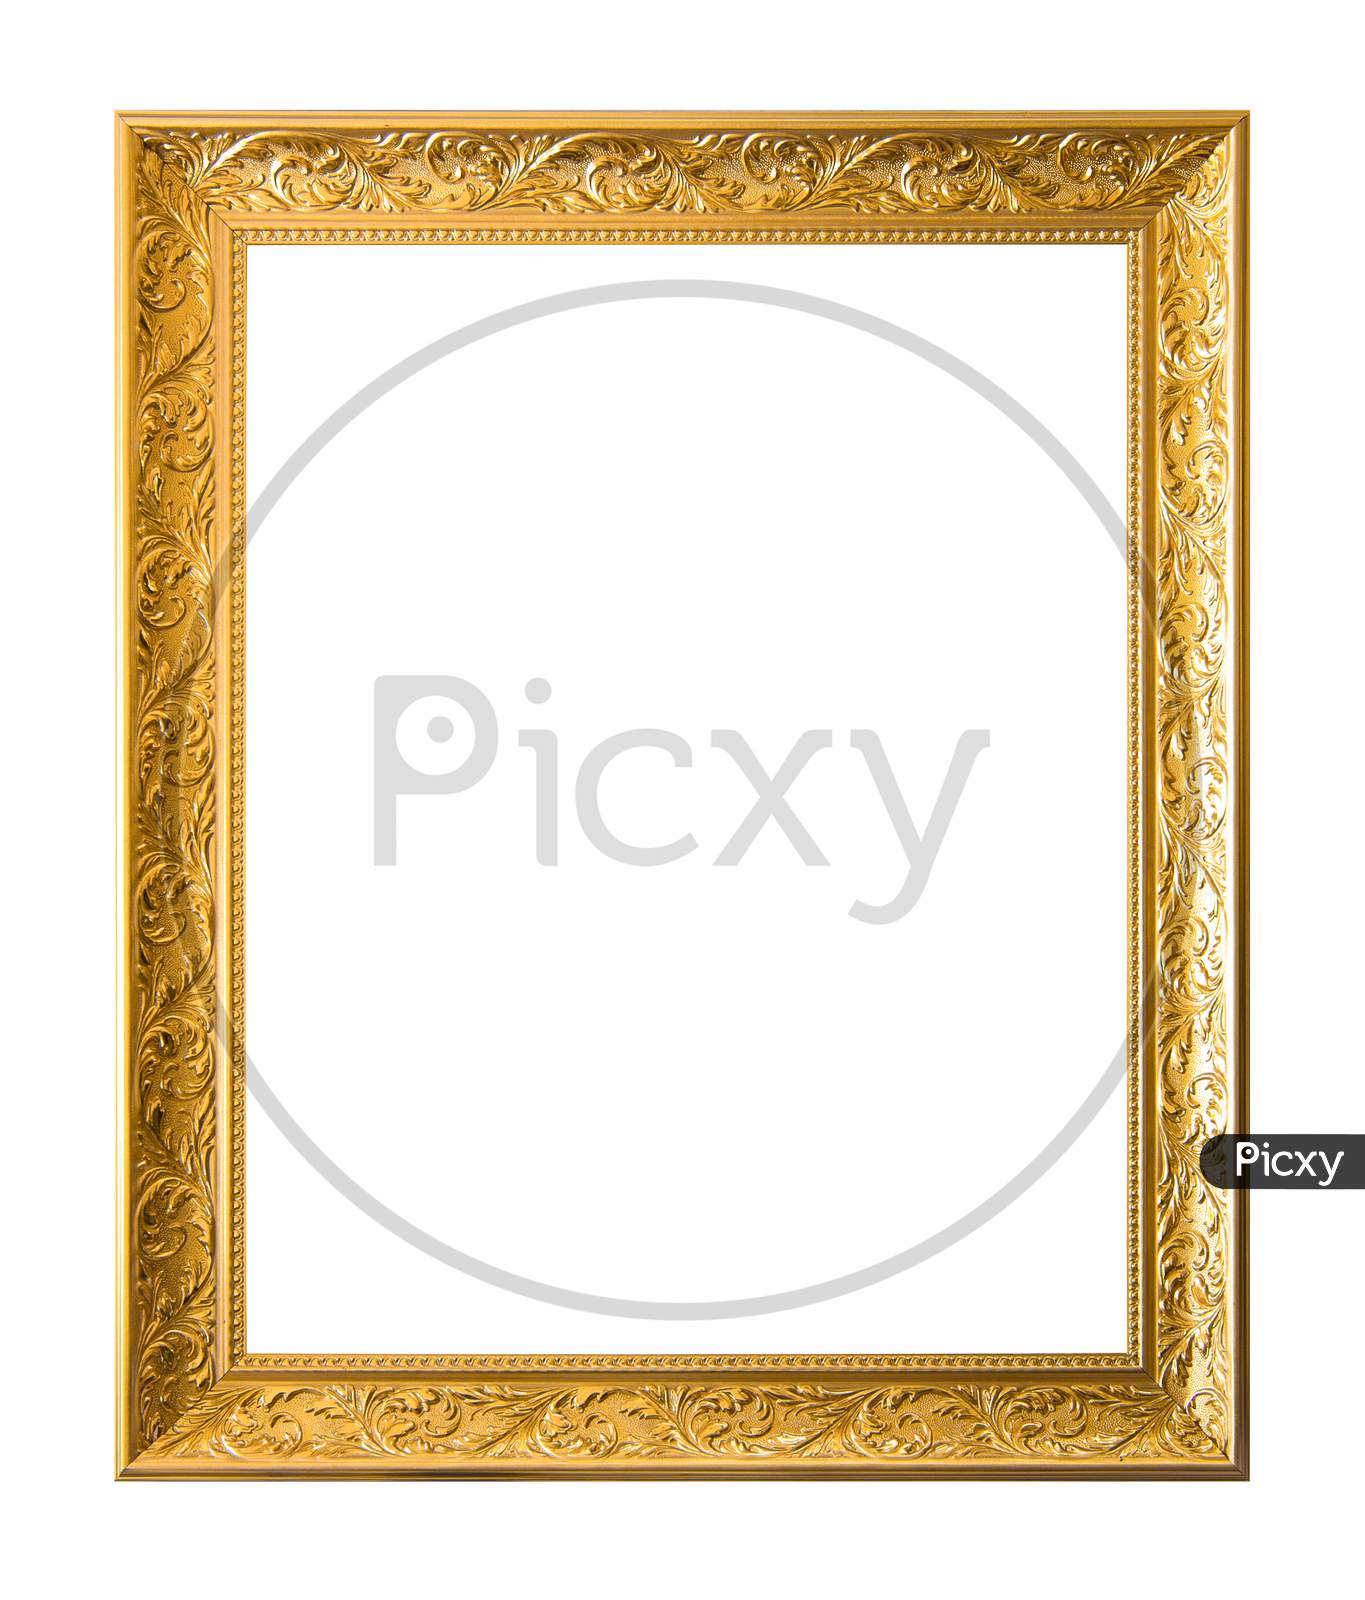 Gold Ancient Vintage Frame Isolated On White Background